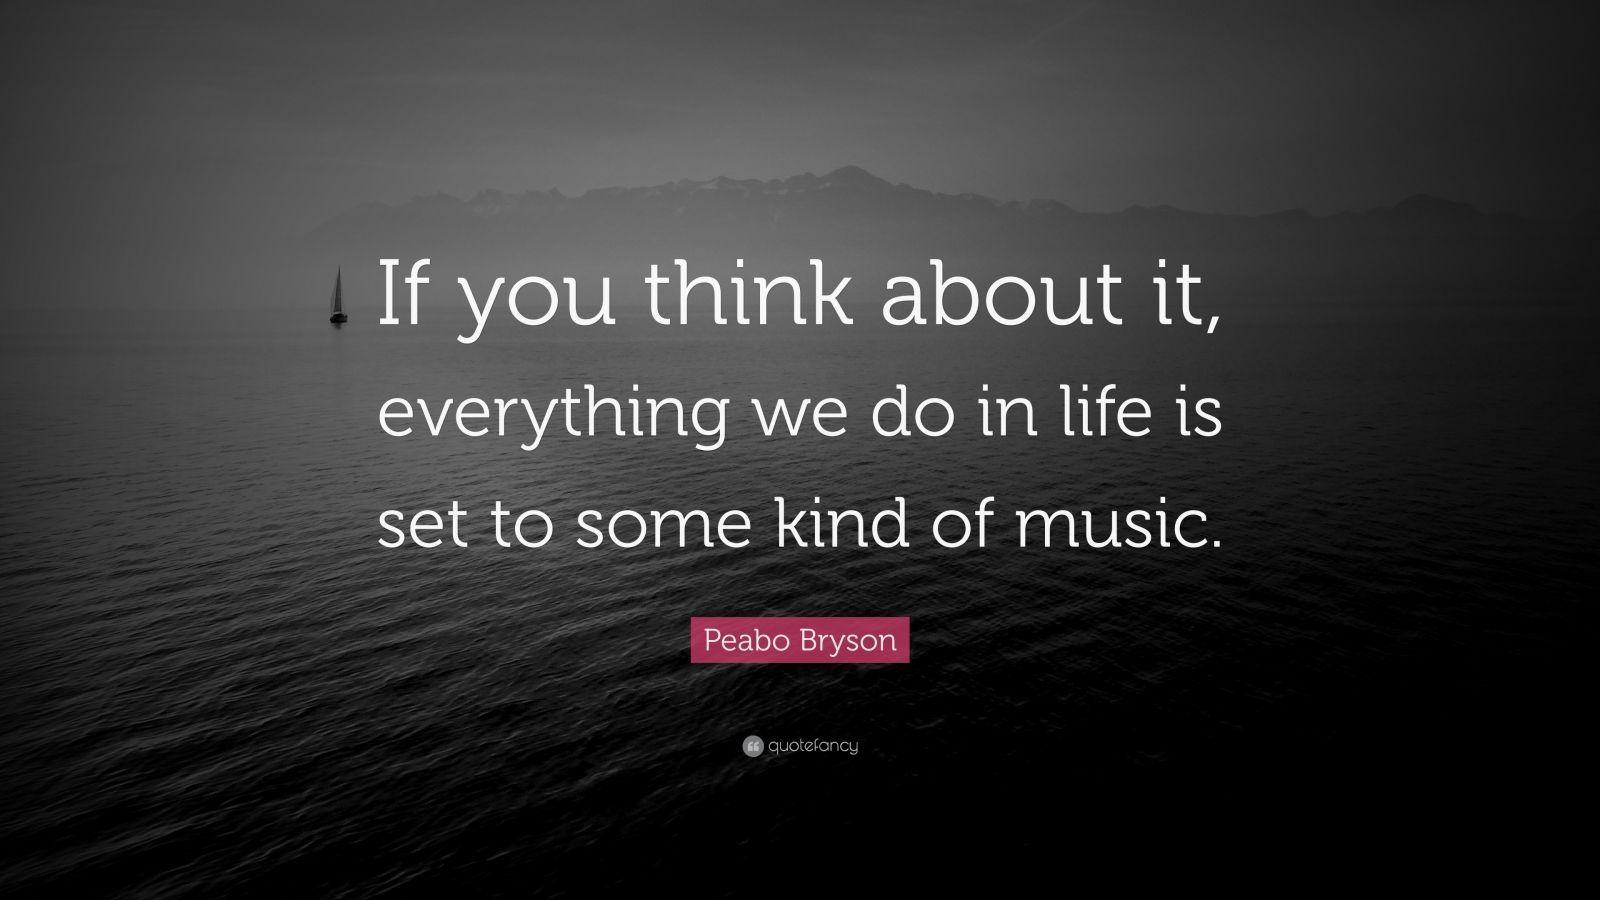 Peabo Bryson Quote: “If you think about it, everything we do in life